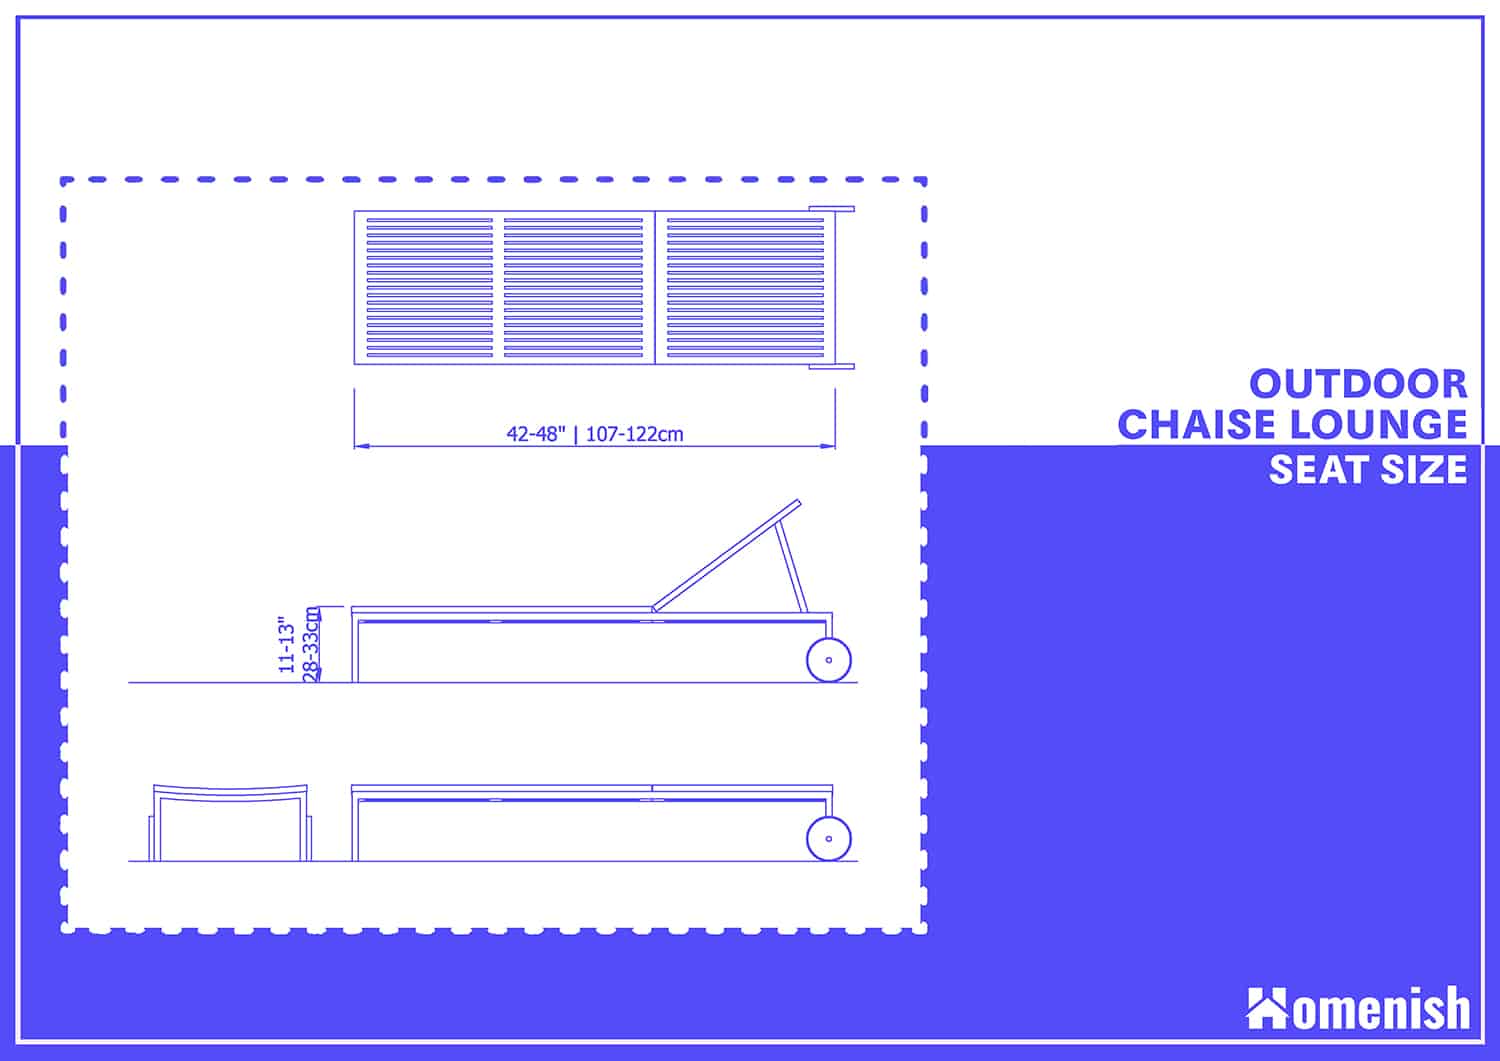 Outdoor Chaise Lounge Seat Size